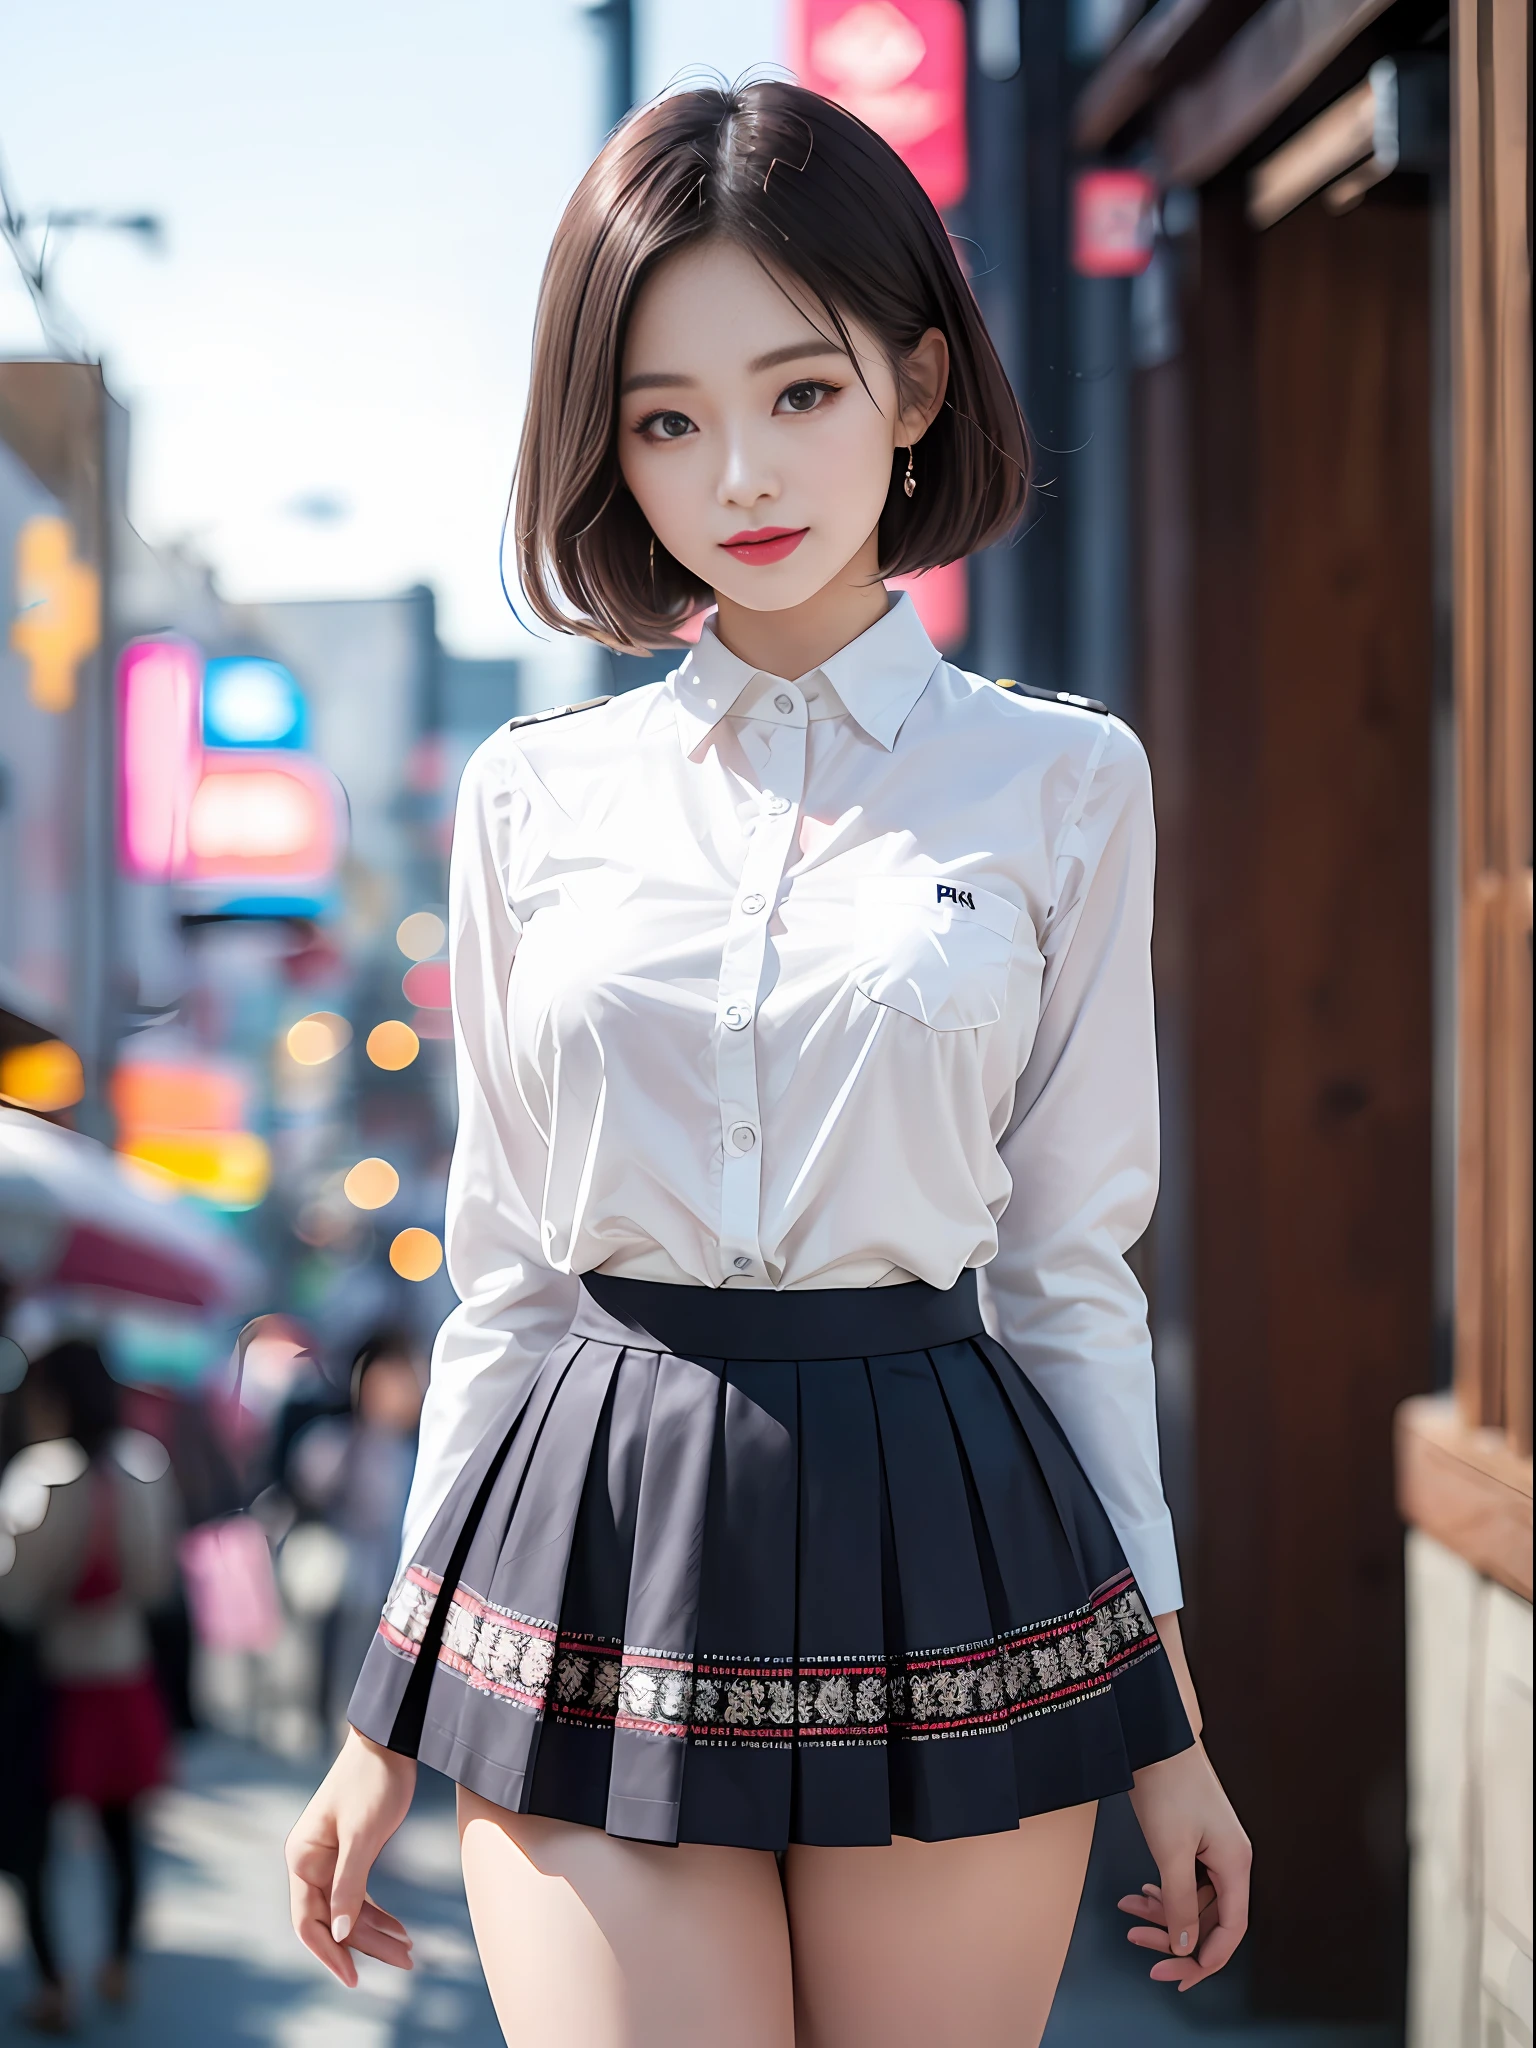 ((Best Quality, 8K, Masterpiece: 1.3)), Super Cute Beautiful Woman, 1 Girl, (Beautiful Breasts:1.3), (Abs, Slender Figure: 1.1), Sharp Focus, (((Intricate Details)), High Detail, Upper Body, One Girl, Black Straight Hair with bangs, Japan  Uniform, White sailor clothes, navy Pleats Skirt, knee-length skirt, 8K, 8K Resolution, clean detailed face, Detailed Body, Detailed Clothes, Sharp Images, Japan Anime Concept Art, trending on Pixiv, looking the viewer, facing the viewer, seductive model pose, seductive smile, pink lipstick, bokeh, field of depth, 8 life size, 8k resolution, upper body image, shot on EOS 5D Mark IV, 35mm lens, f1.8,